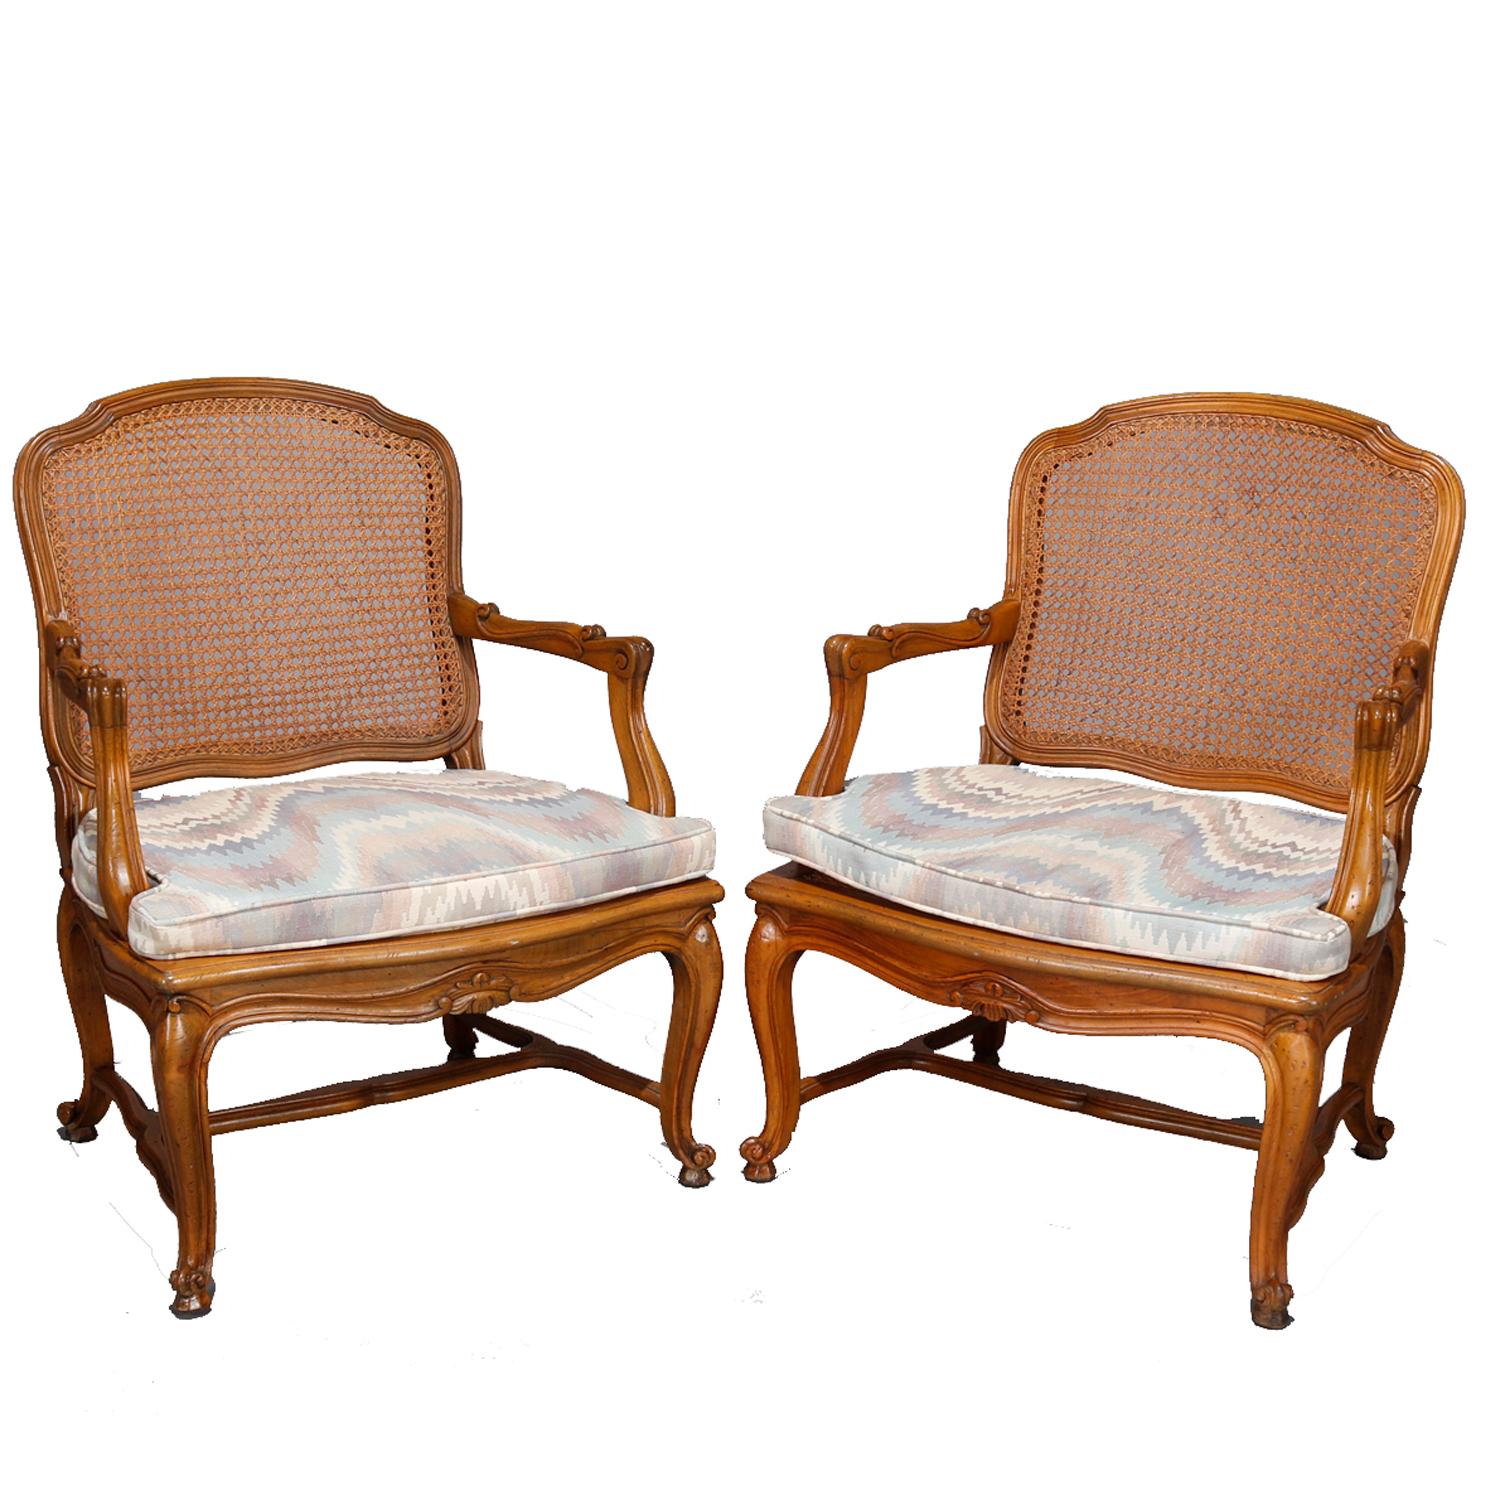 A pair of antique French Louis XV armchairs offer carved fruitwood frames with caned seats and backs, raised on cabriole legs terminating in scroll feet, chair pads included, 19th century

***DELIVERY NOTICE – Due to COVID-19 we are employing